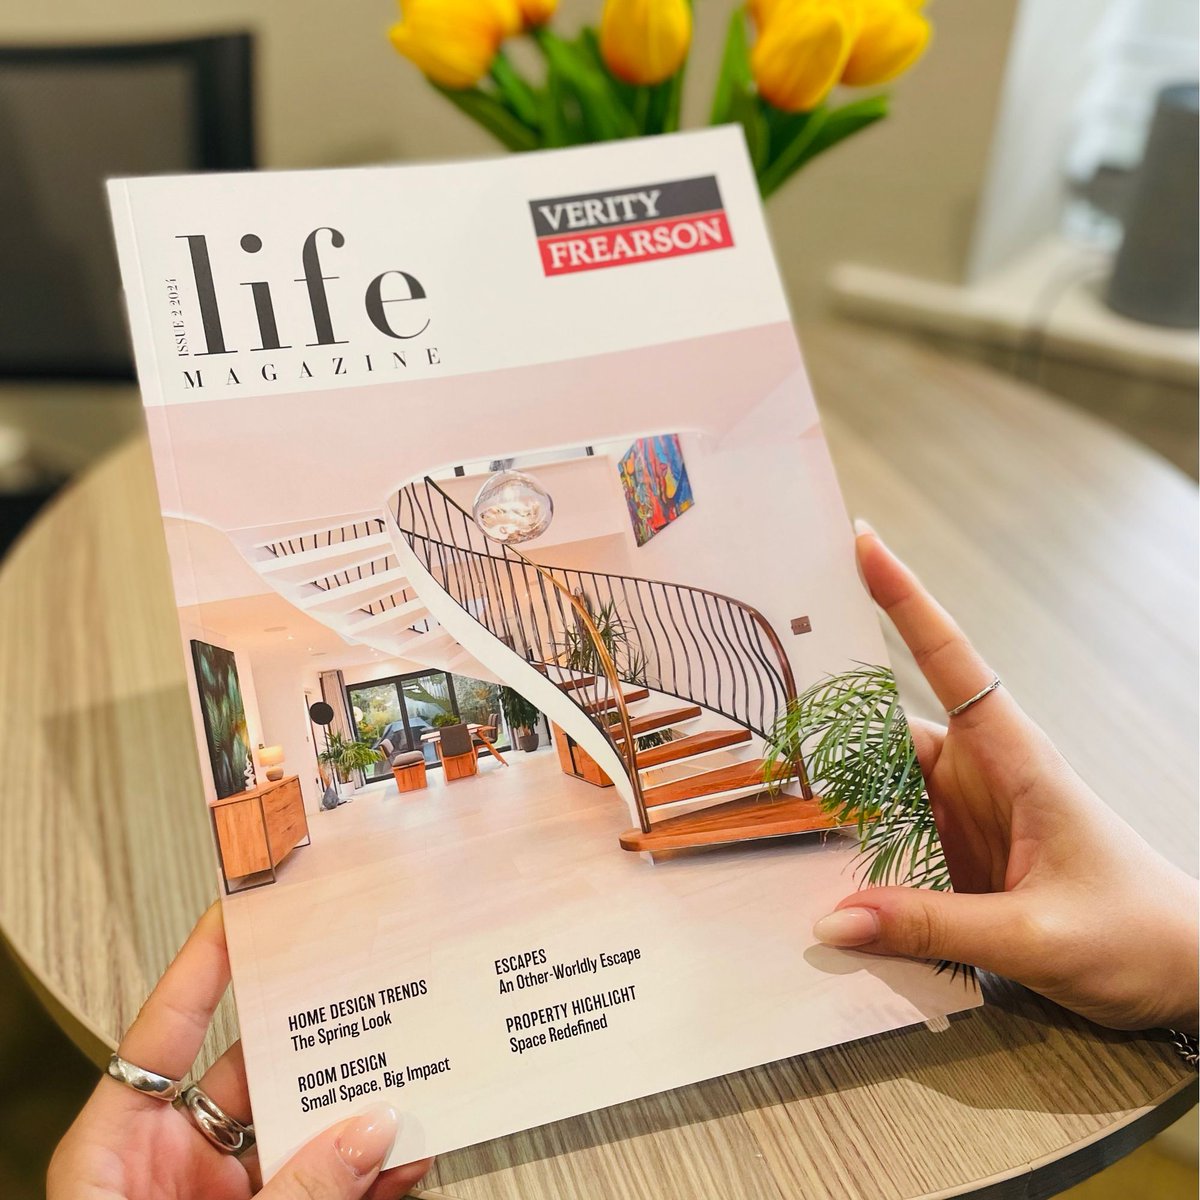 😍The latest issue of our fab lifestyle magazine just landed! Home decor tips, travel features, a selection of local properties for sale & more!

Pop in for your free copy. 😃

#harrogate #estateagents #theharrogateagent #proudguildmember #interiors #lifestyle #property #travel